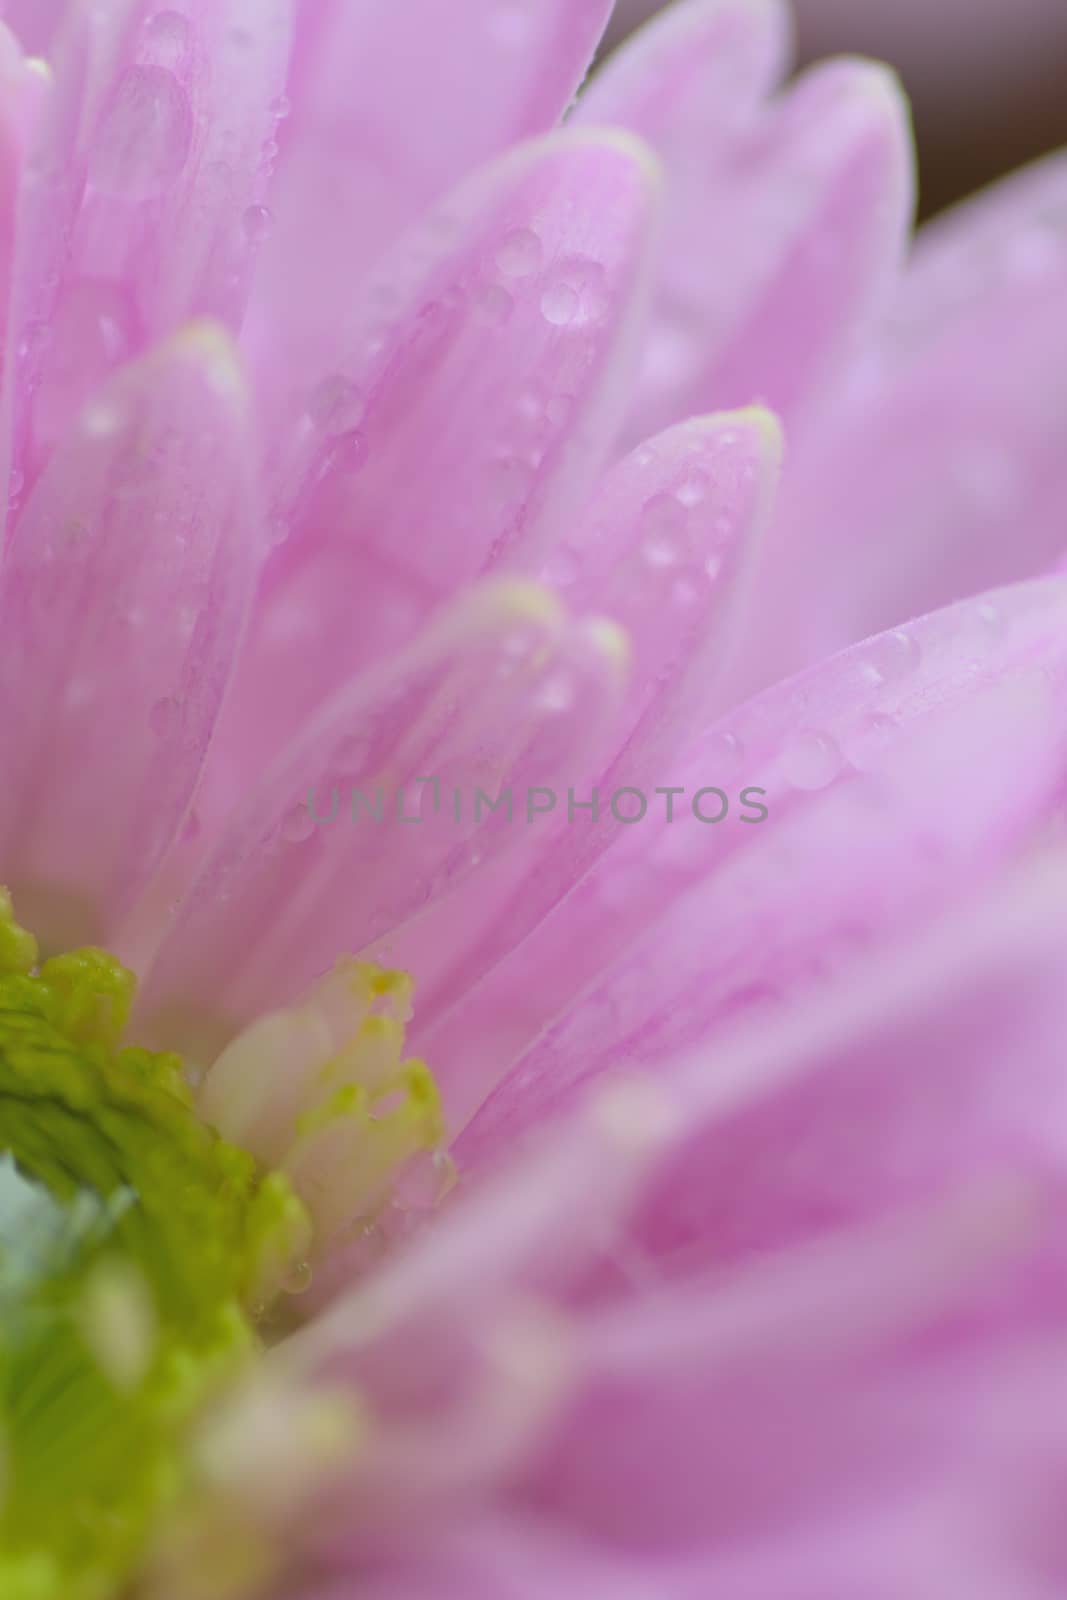 Macro texture of pink Dahlia flower petals with water droplet in vertical frame